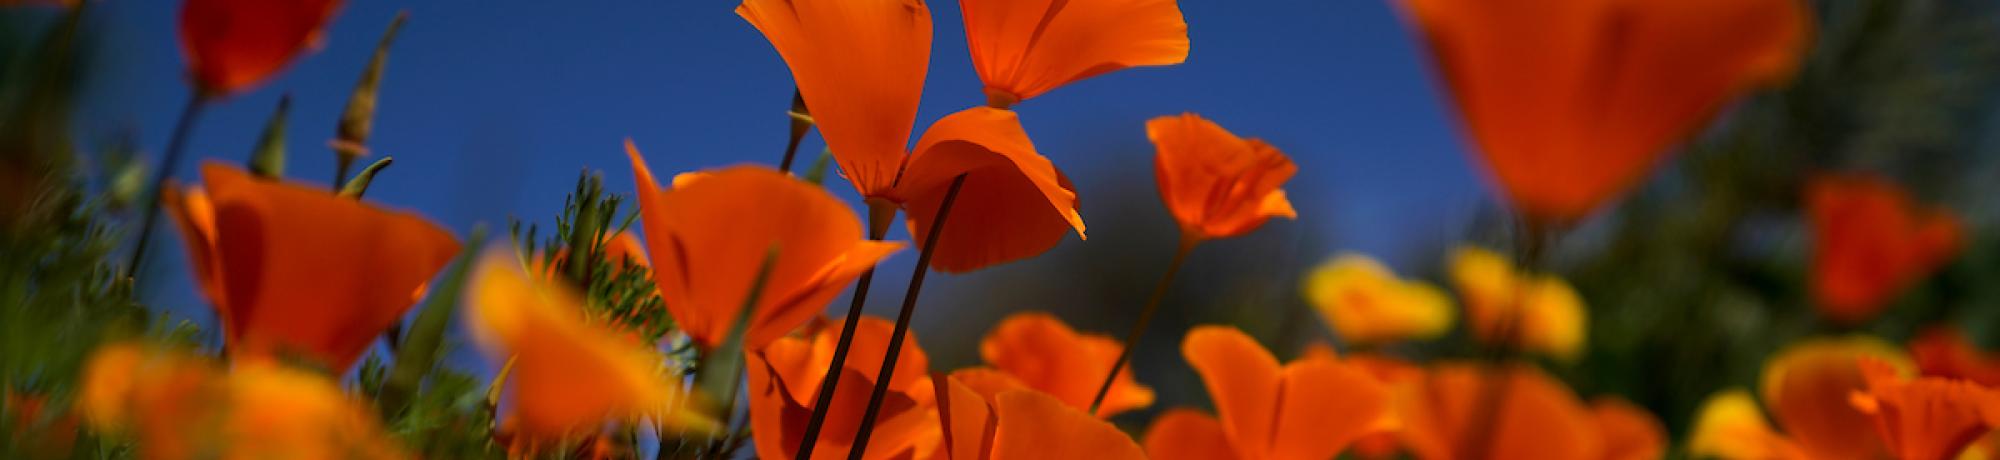 Vibrant orange poppies in front of a blue sky.